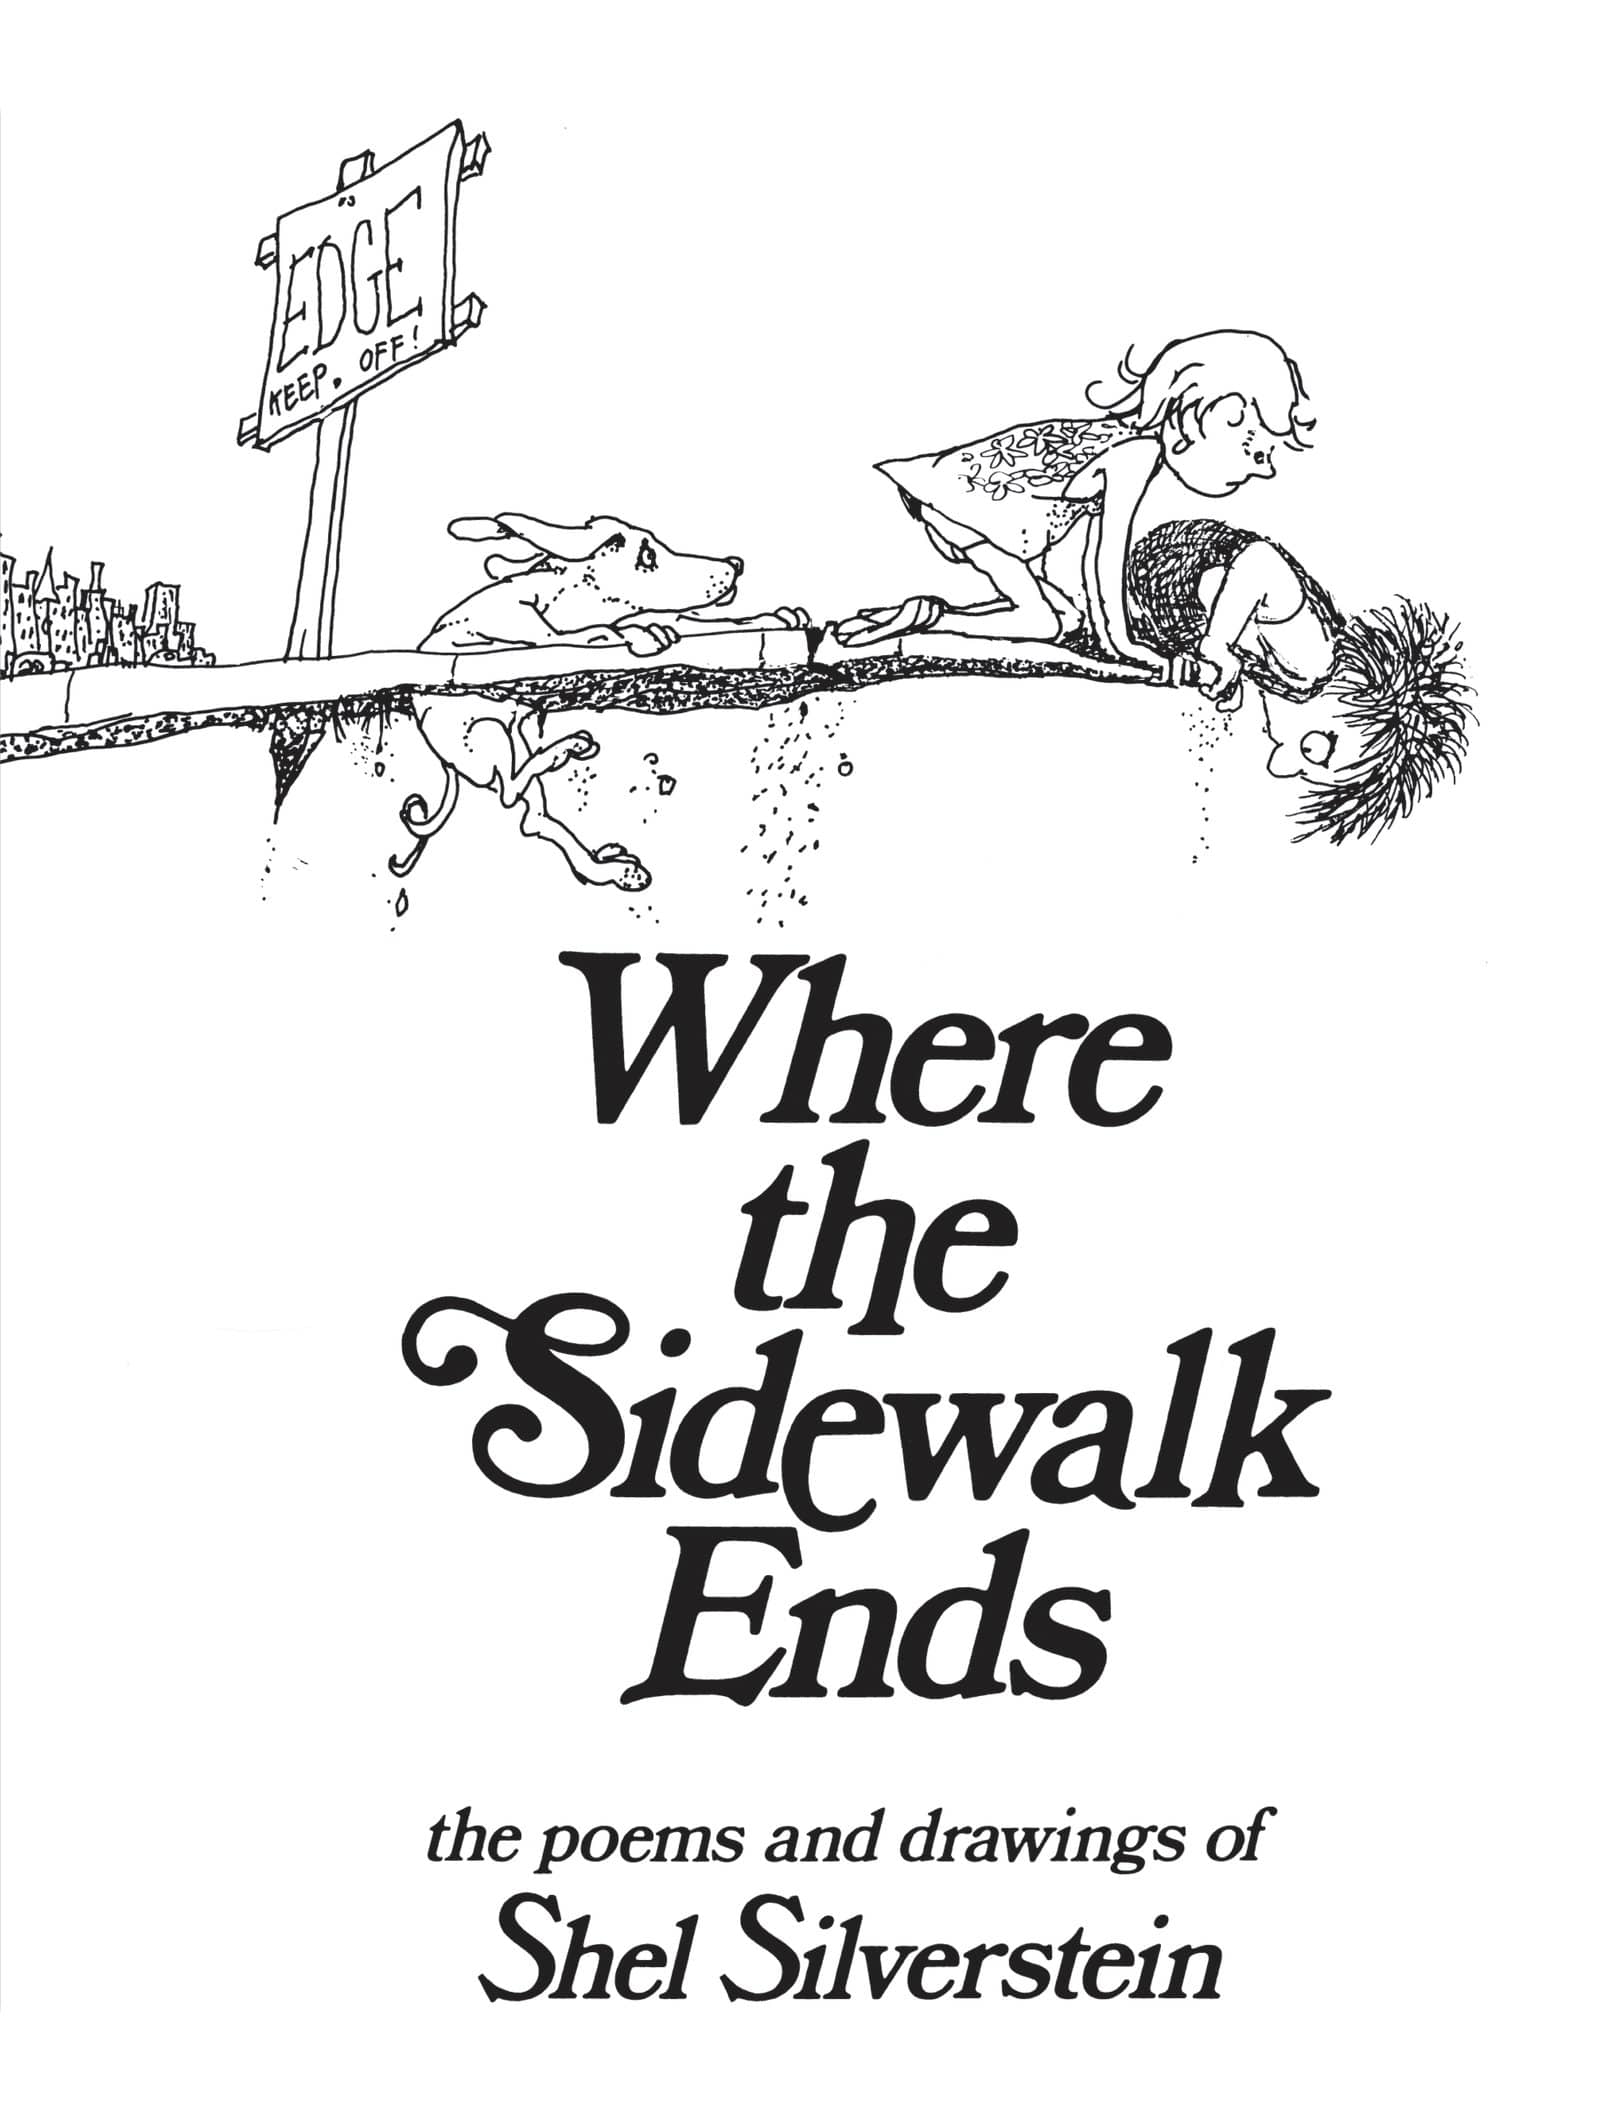 The cover for the book Where the Sidewalk Ends